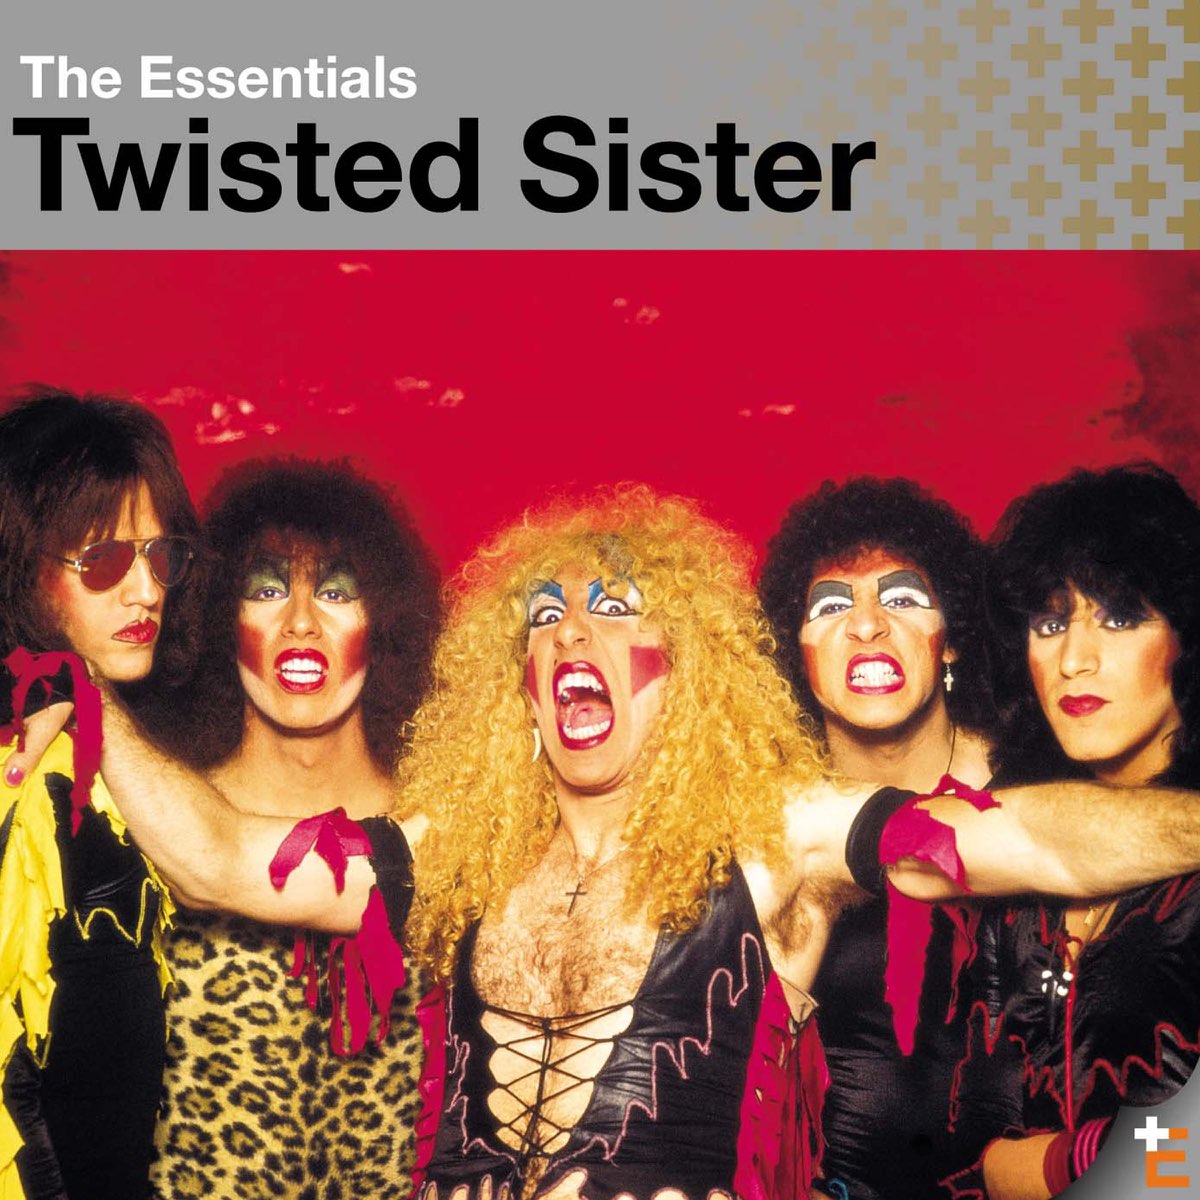 Twisted Sister: Essentials - Album by Twisted Sister - Apple Music